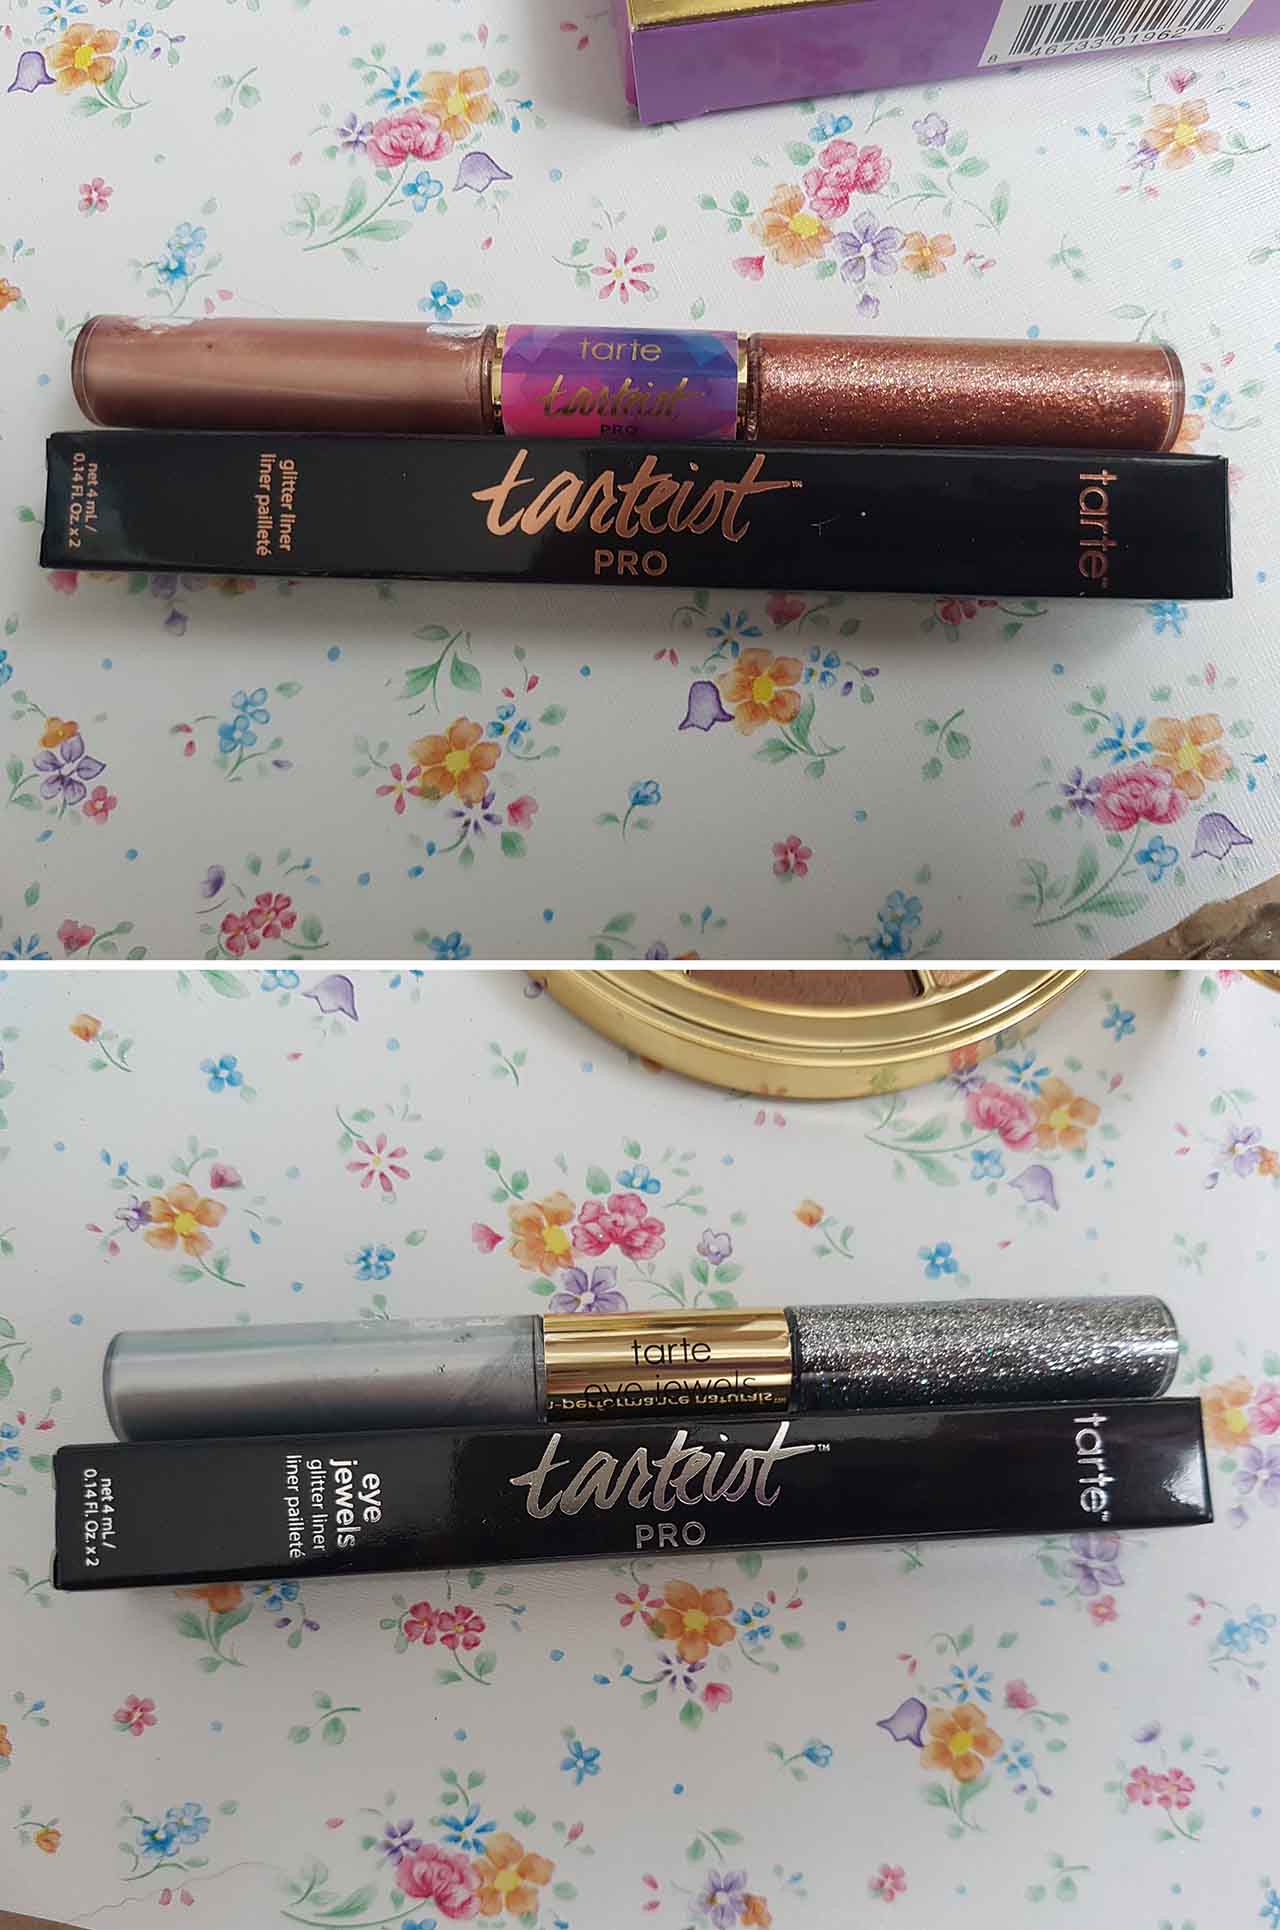 The Beauty That Is Tarte Cosmetics - The Pro Glitter Liners In Rose Gold And Silver: These liners are lovely! They are 2-in-1 metallic liquid eyeliners with a glitter topcoat and they can be used together or individually. The pigmentation of the metallic liners is second to none and once applied they don’t budge. The glitter liners are also good but subtler and need to be built up to gain the full glitter effect. They will no doubt come in handy in the coming months leading to Christmas!